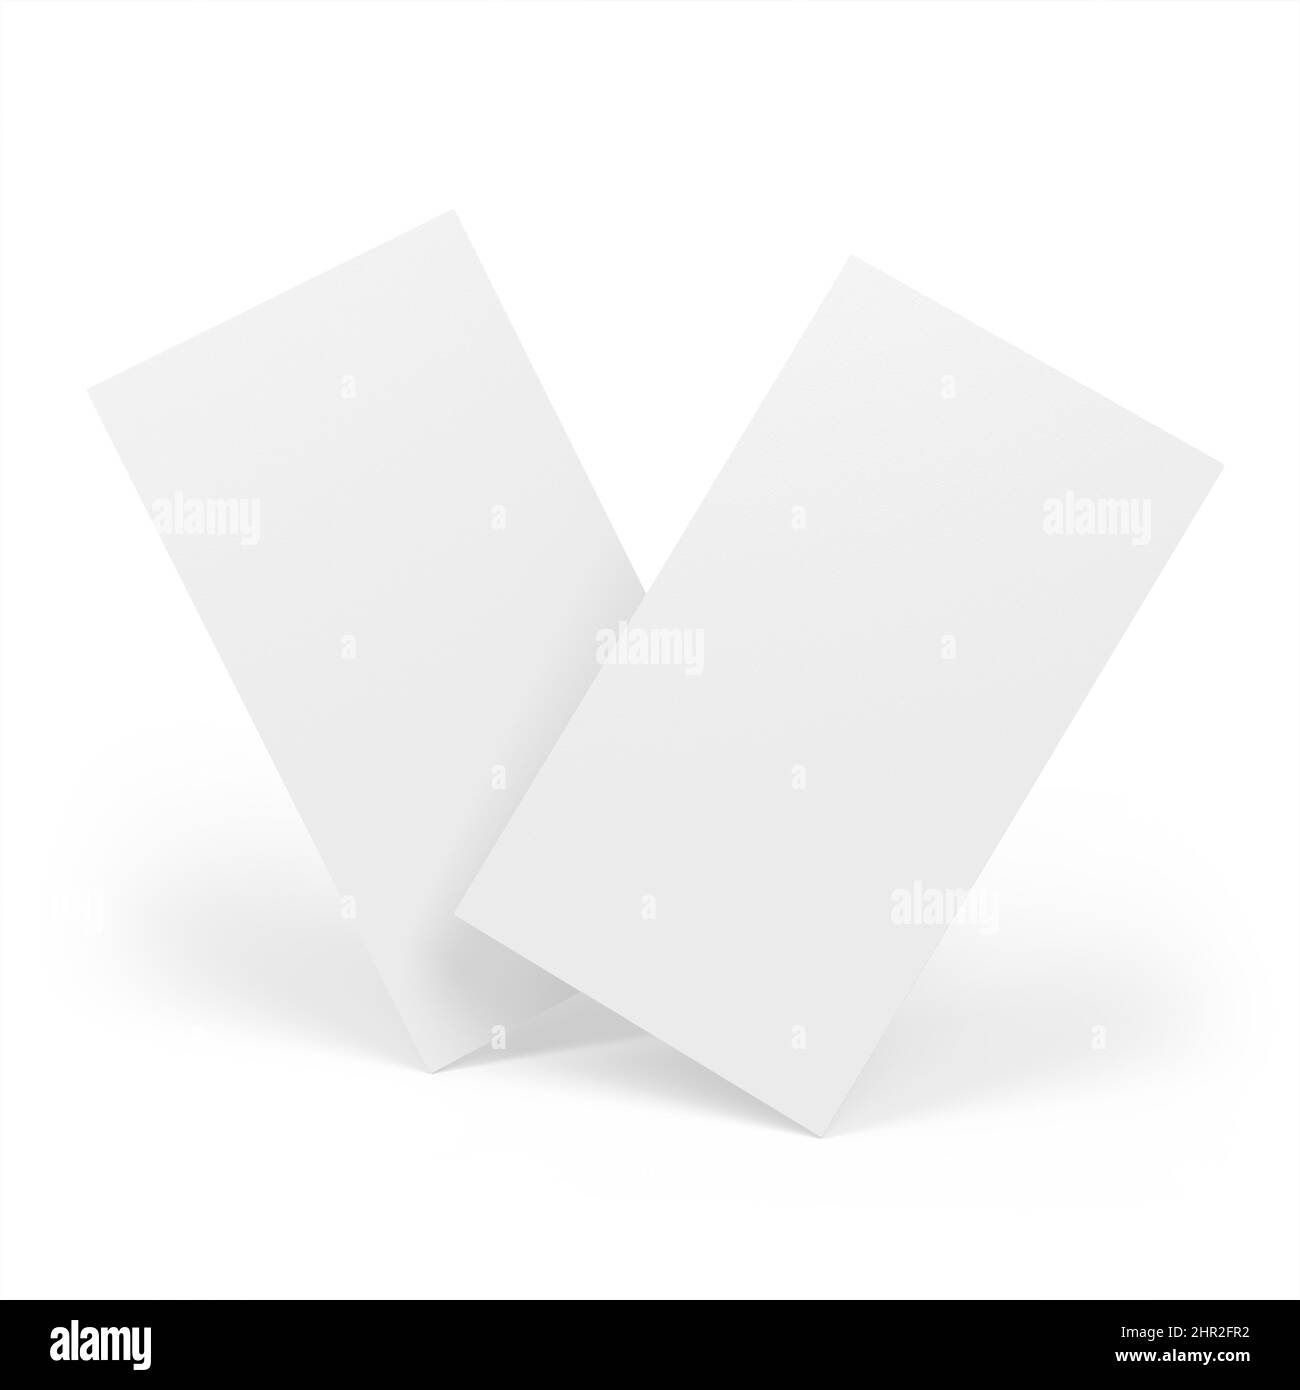 Business Card Mockup 3D Rendering Stock Photo